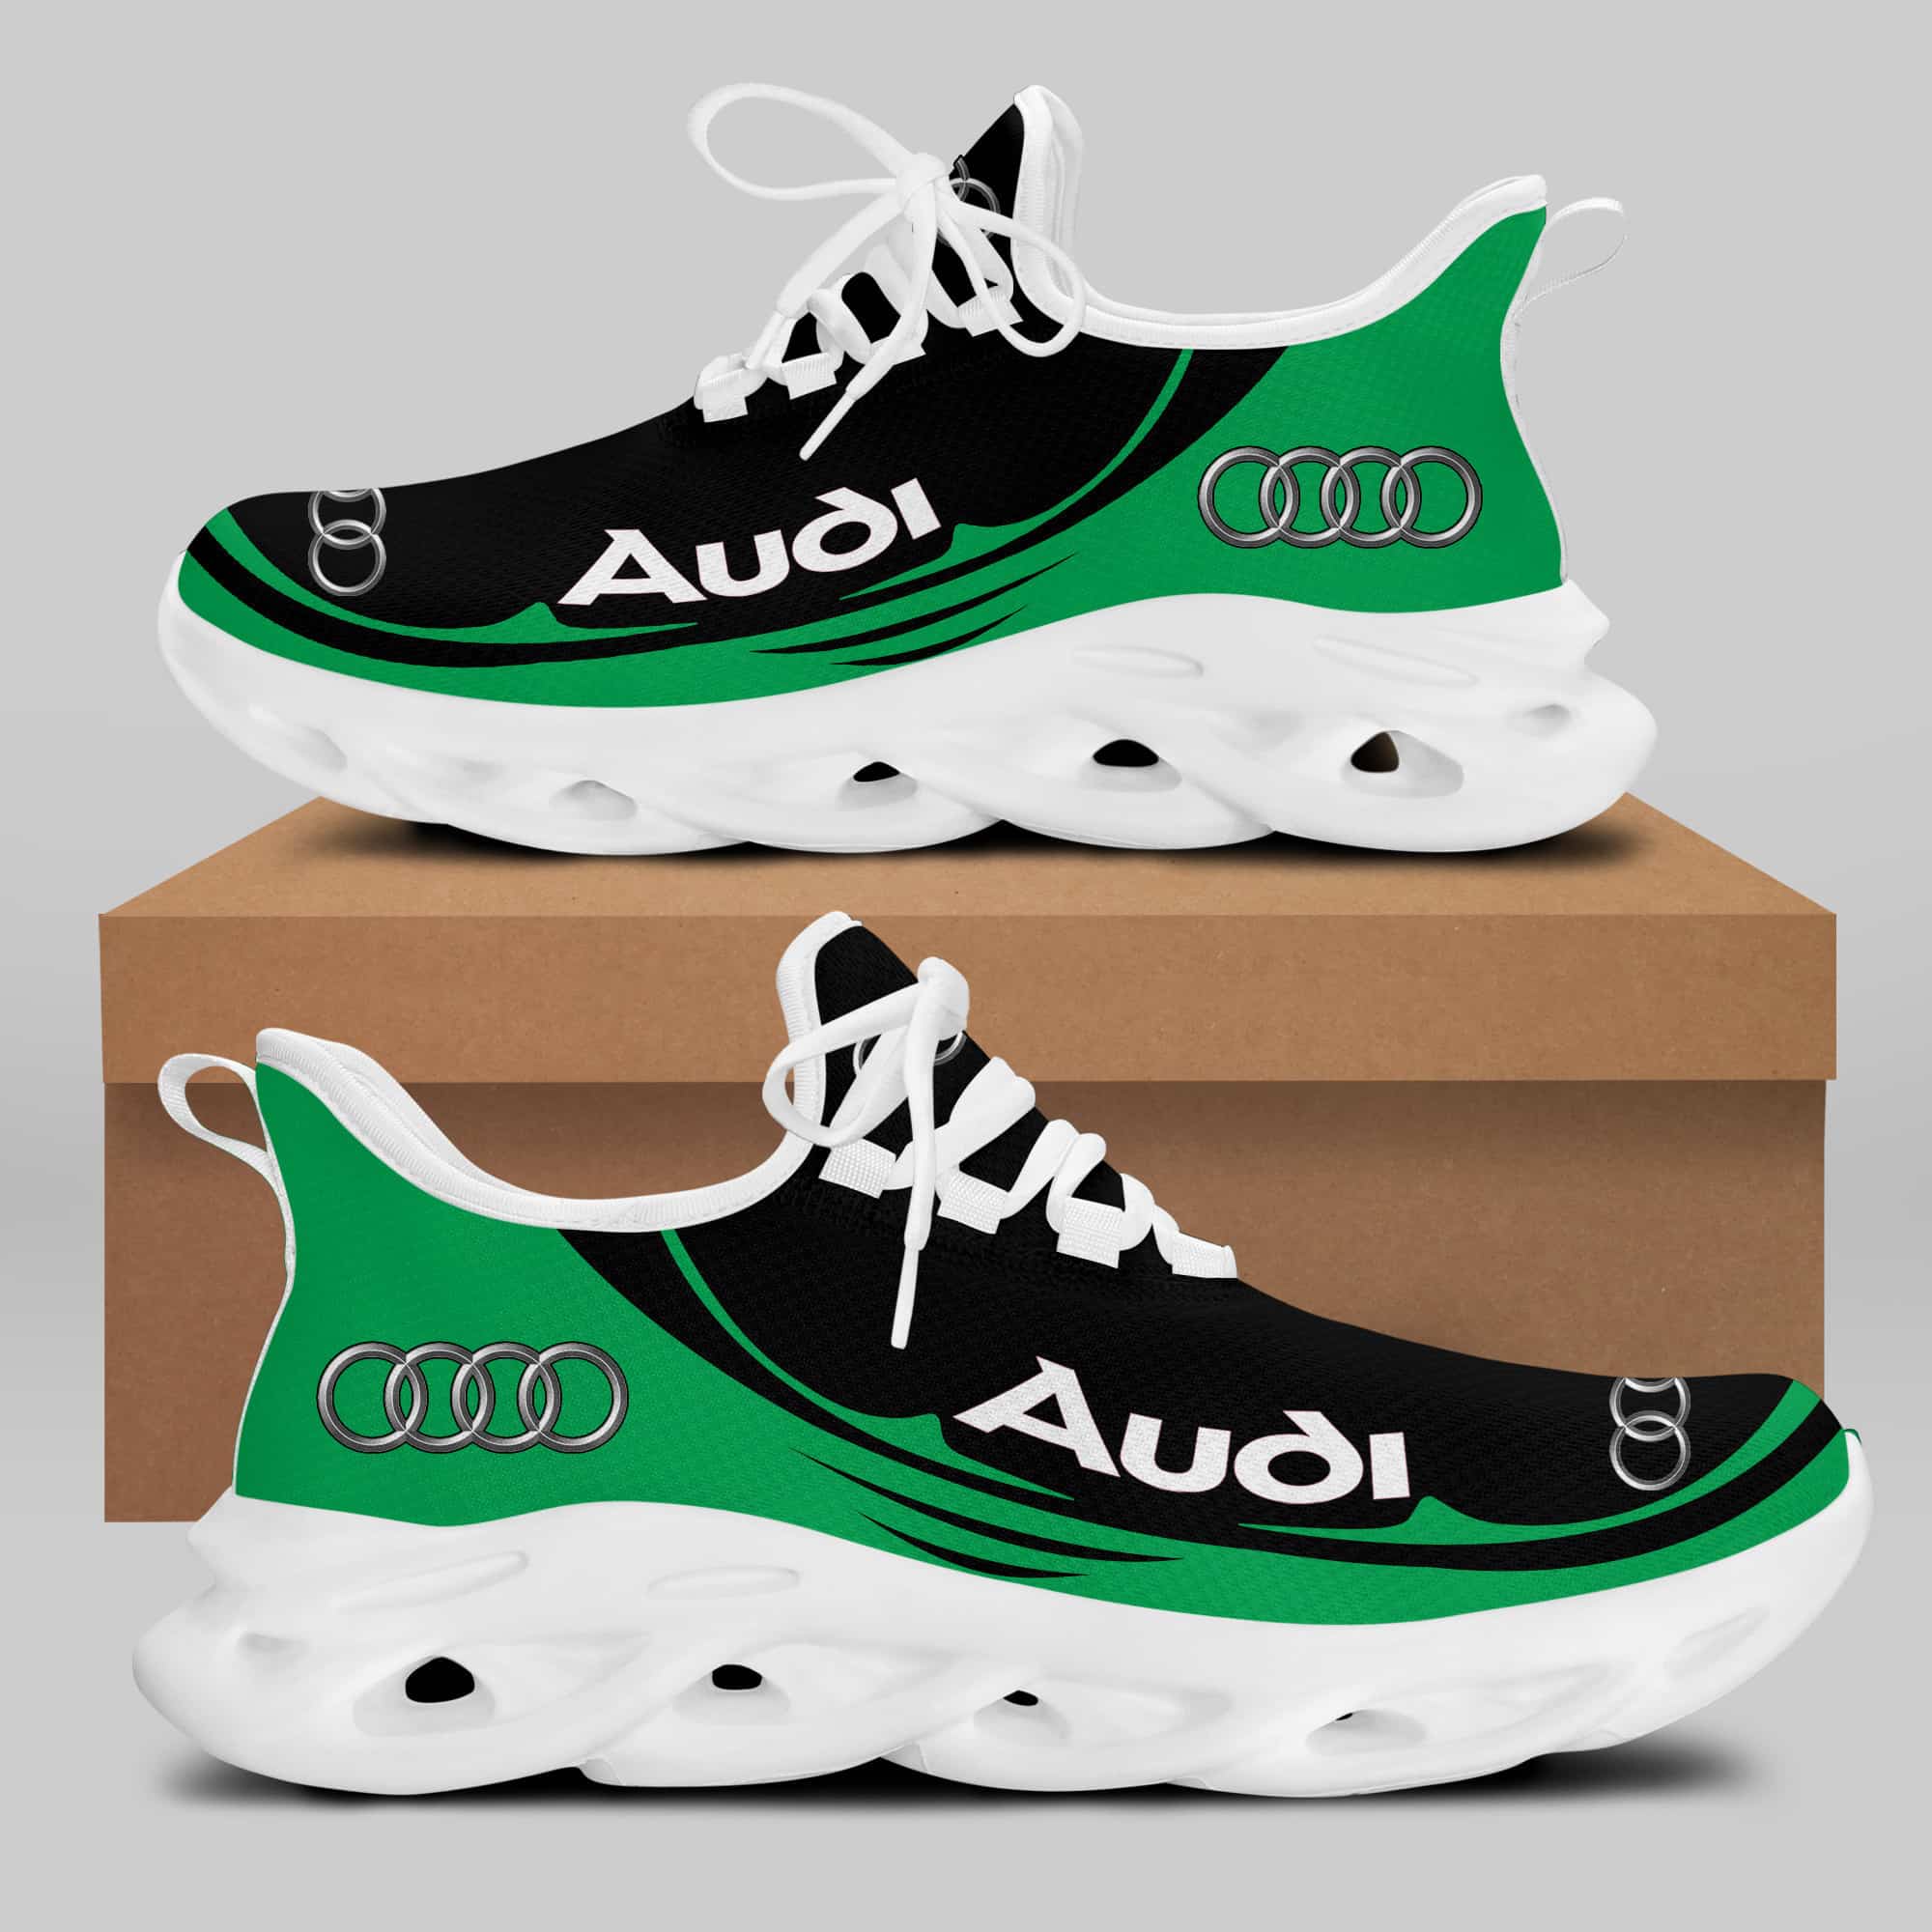 Audi Sport Running Shoes Max Soul Shoes Sneakers Ver 34 2